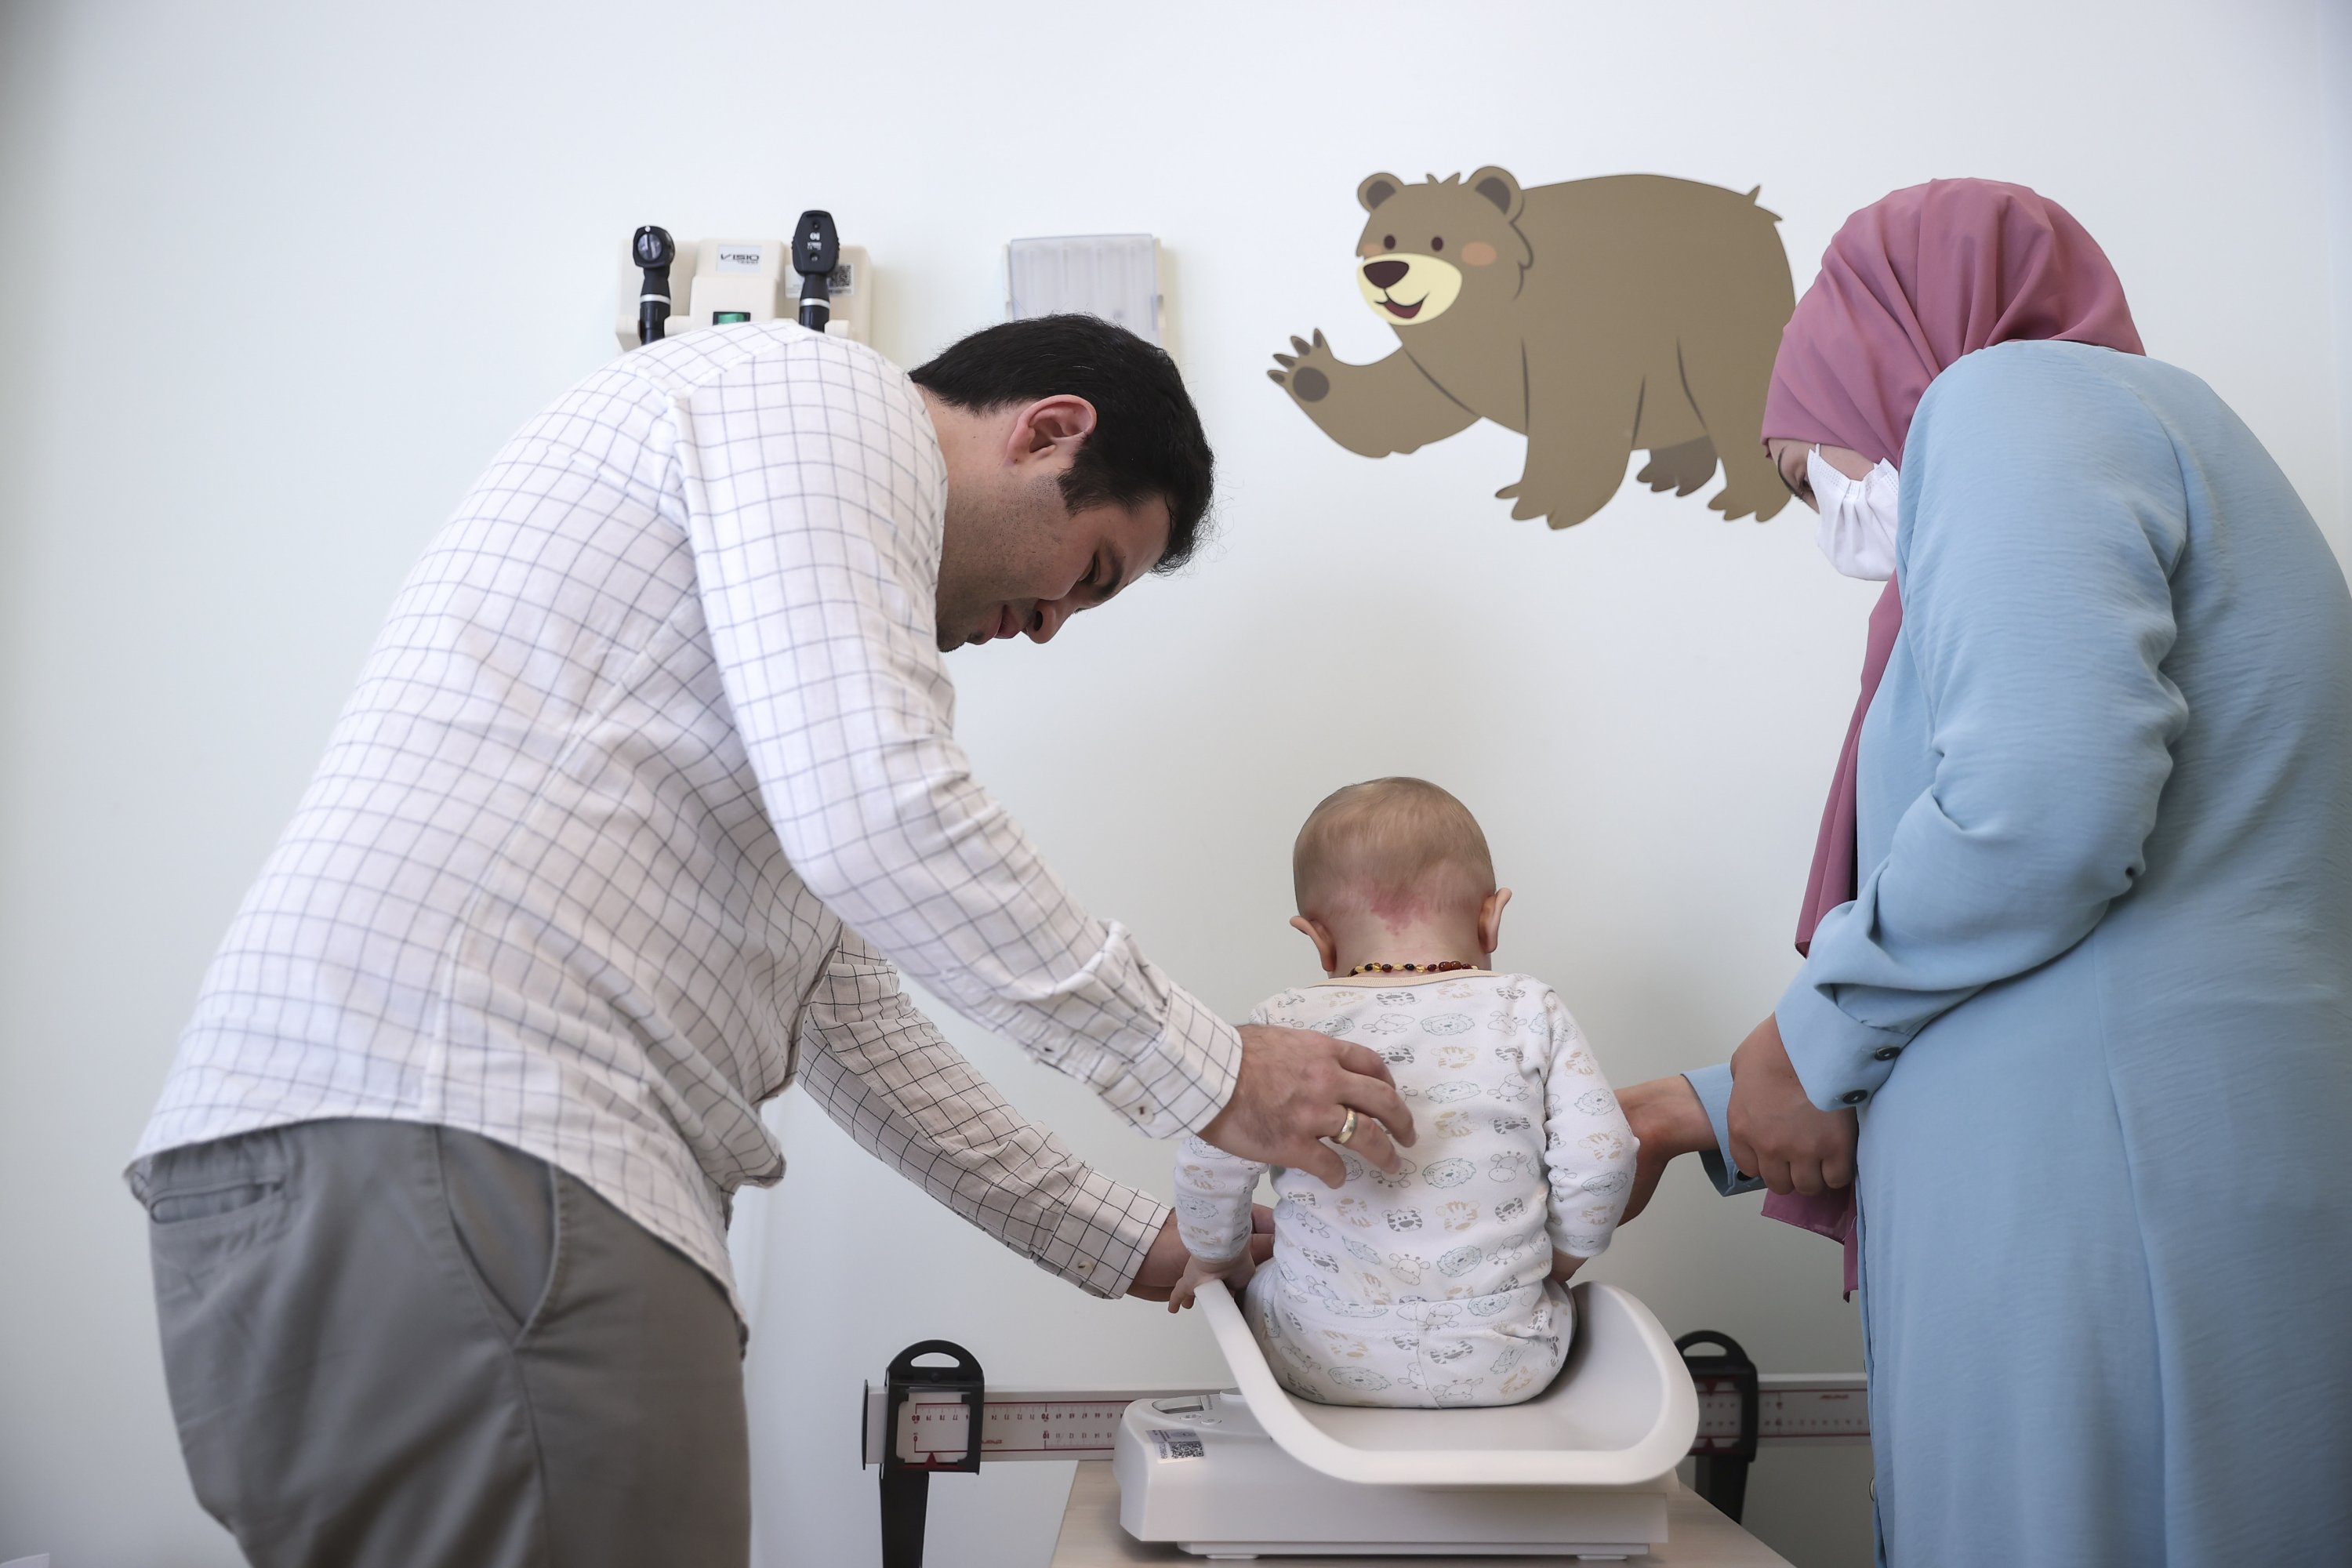 Istanbul's state hospital cares for children before they fall sick